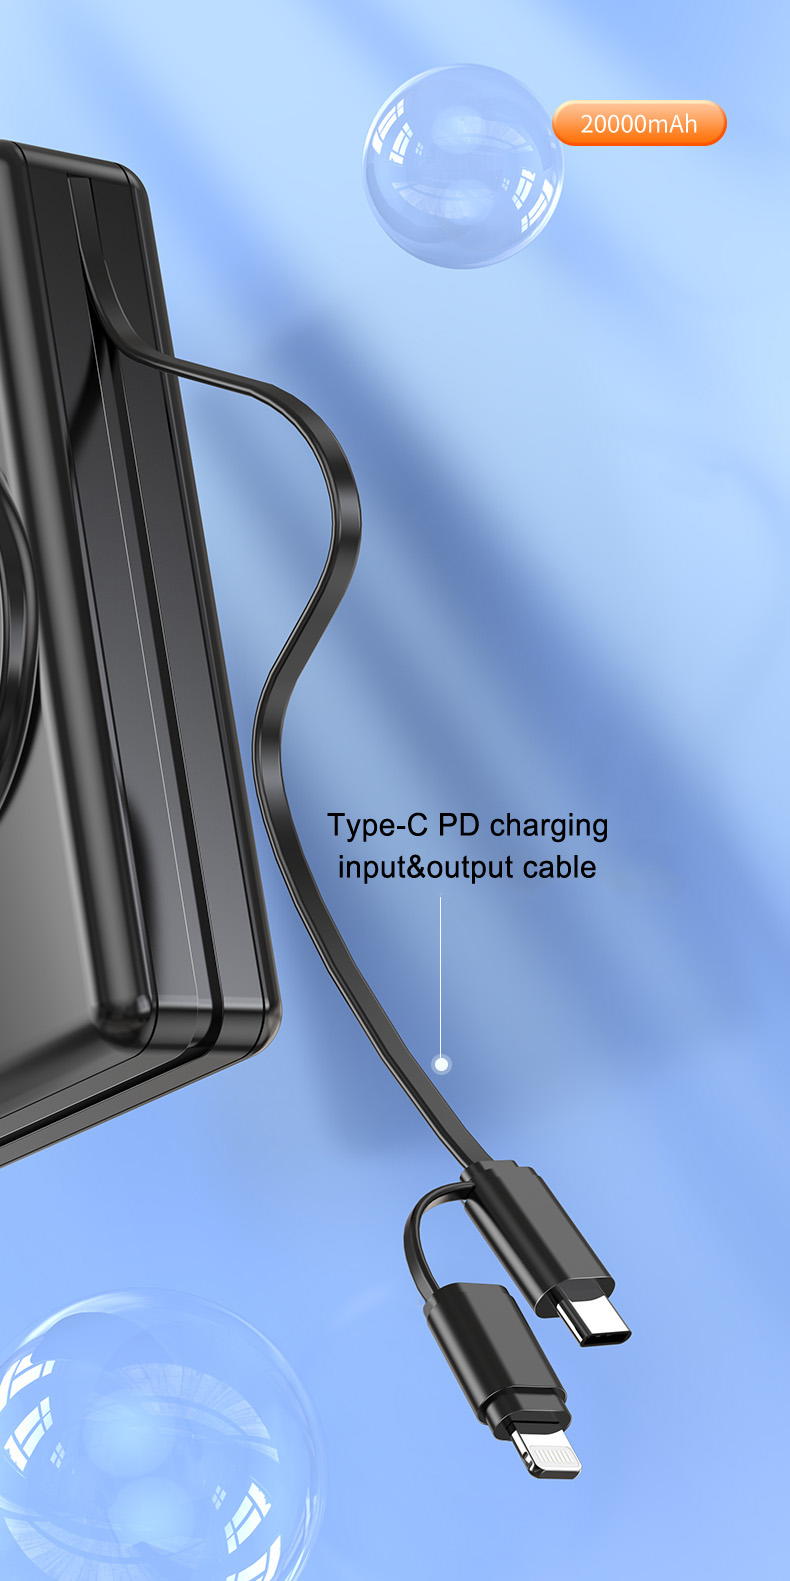 20000mAh Fast Charging PD Magsafe Worldwide AC Power Bank All-in-1 Charger  from China Manufacturer - E-Ser Electronic CO., LTD